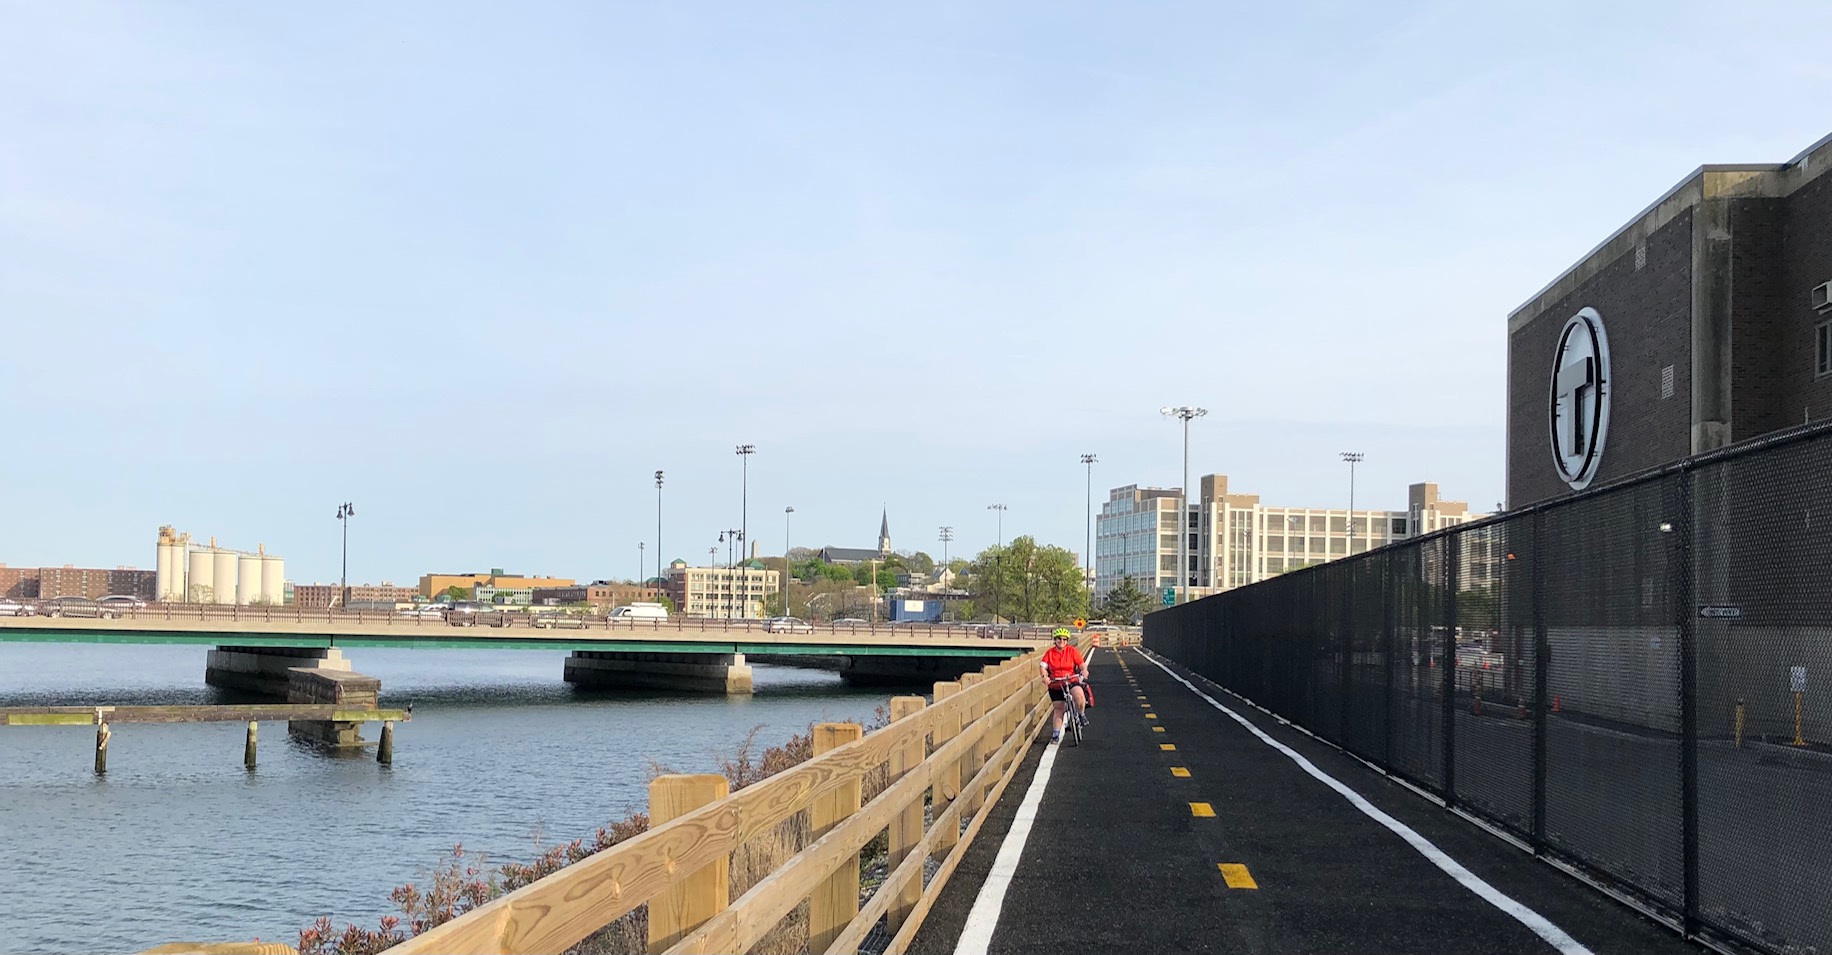 The new Charlestown Seawall bike path, looking south towards the Alford Street bridge. The Mystic River is on the left and the MBTA's Charlestown bus garage is located behind a high chain-link fence on the right.